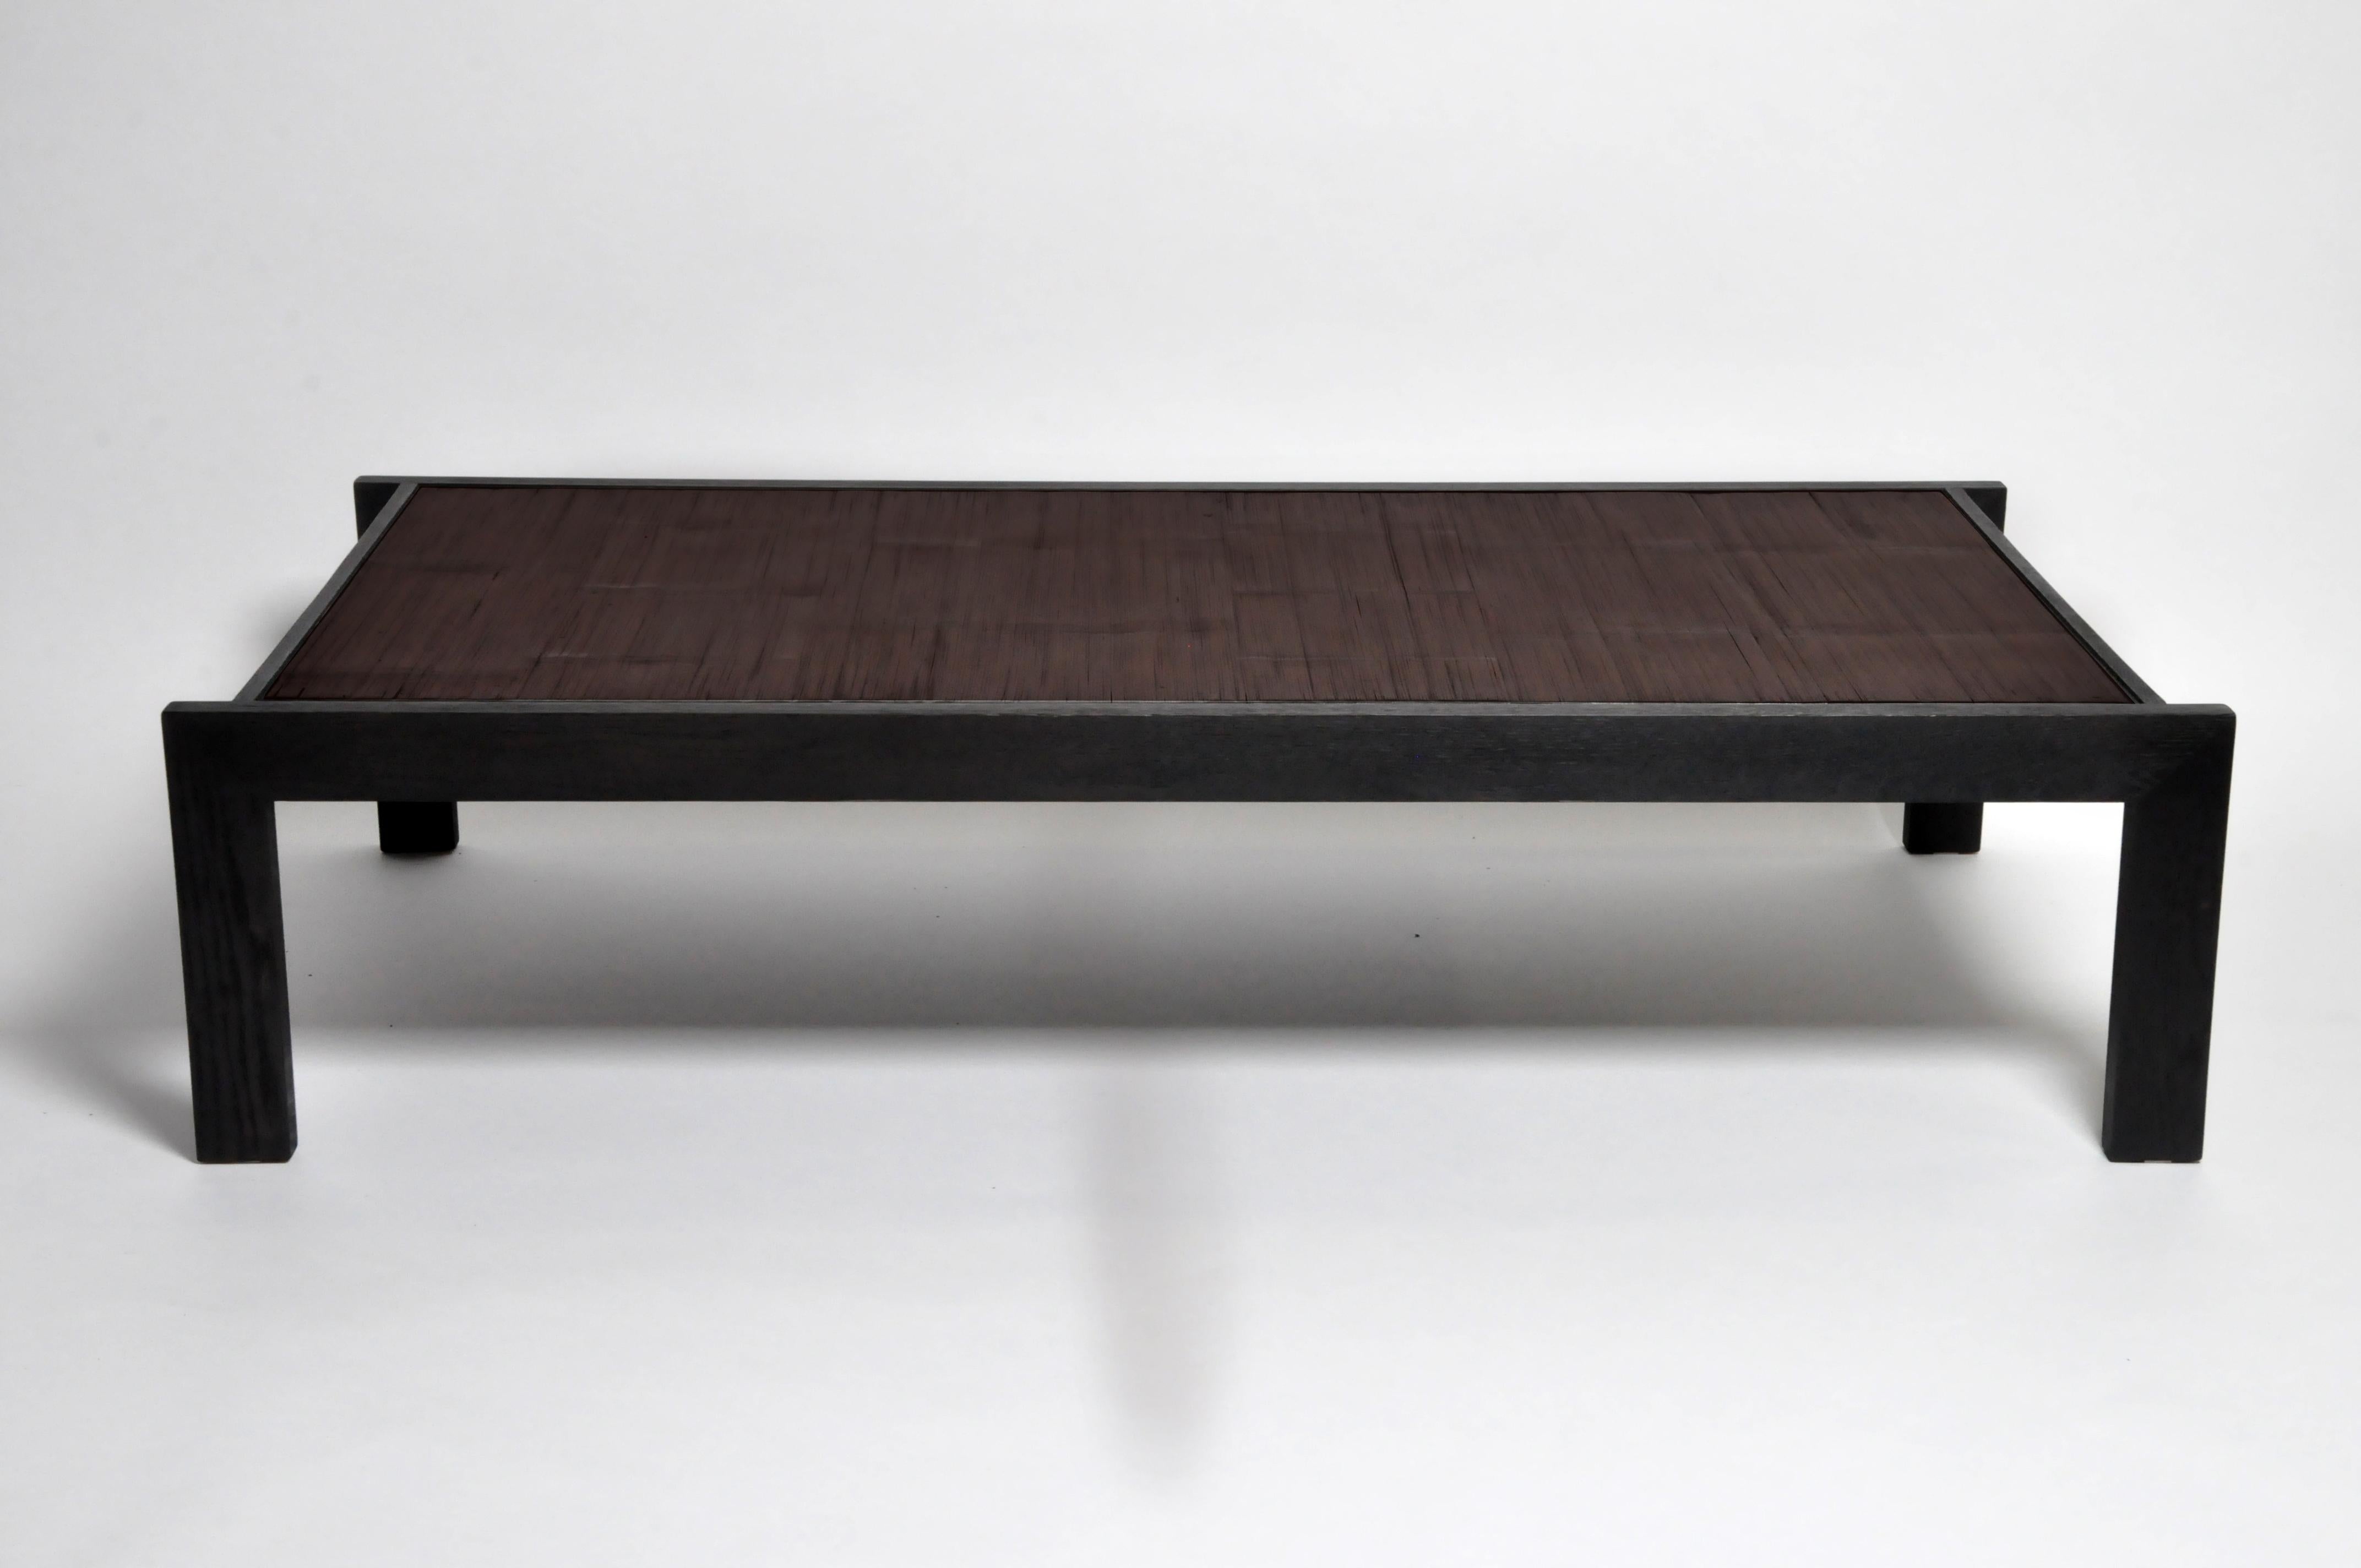 This large custom coffee table is made from a vintage Chinese opium mat. The mat has been affixed to a wooden panel and mounted inside a frame of solid white oak. The opium mat itself is made from slices of bamboo held together with jute rope. The